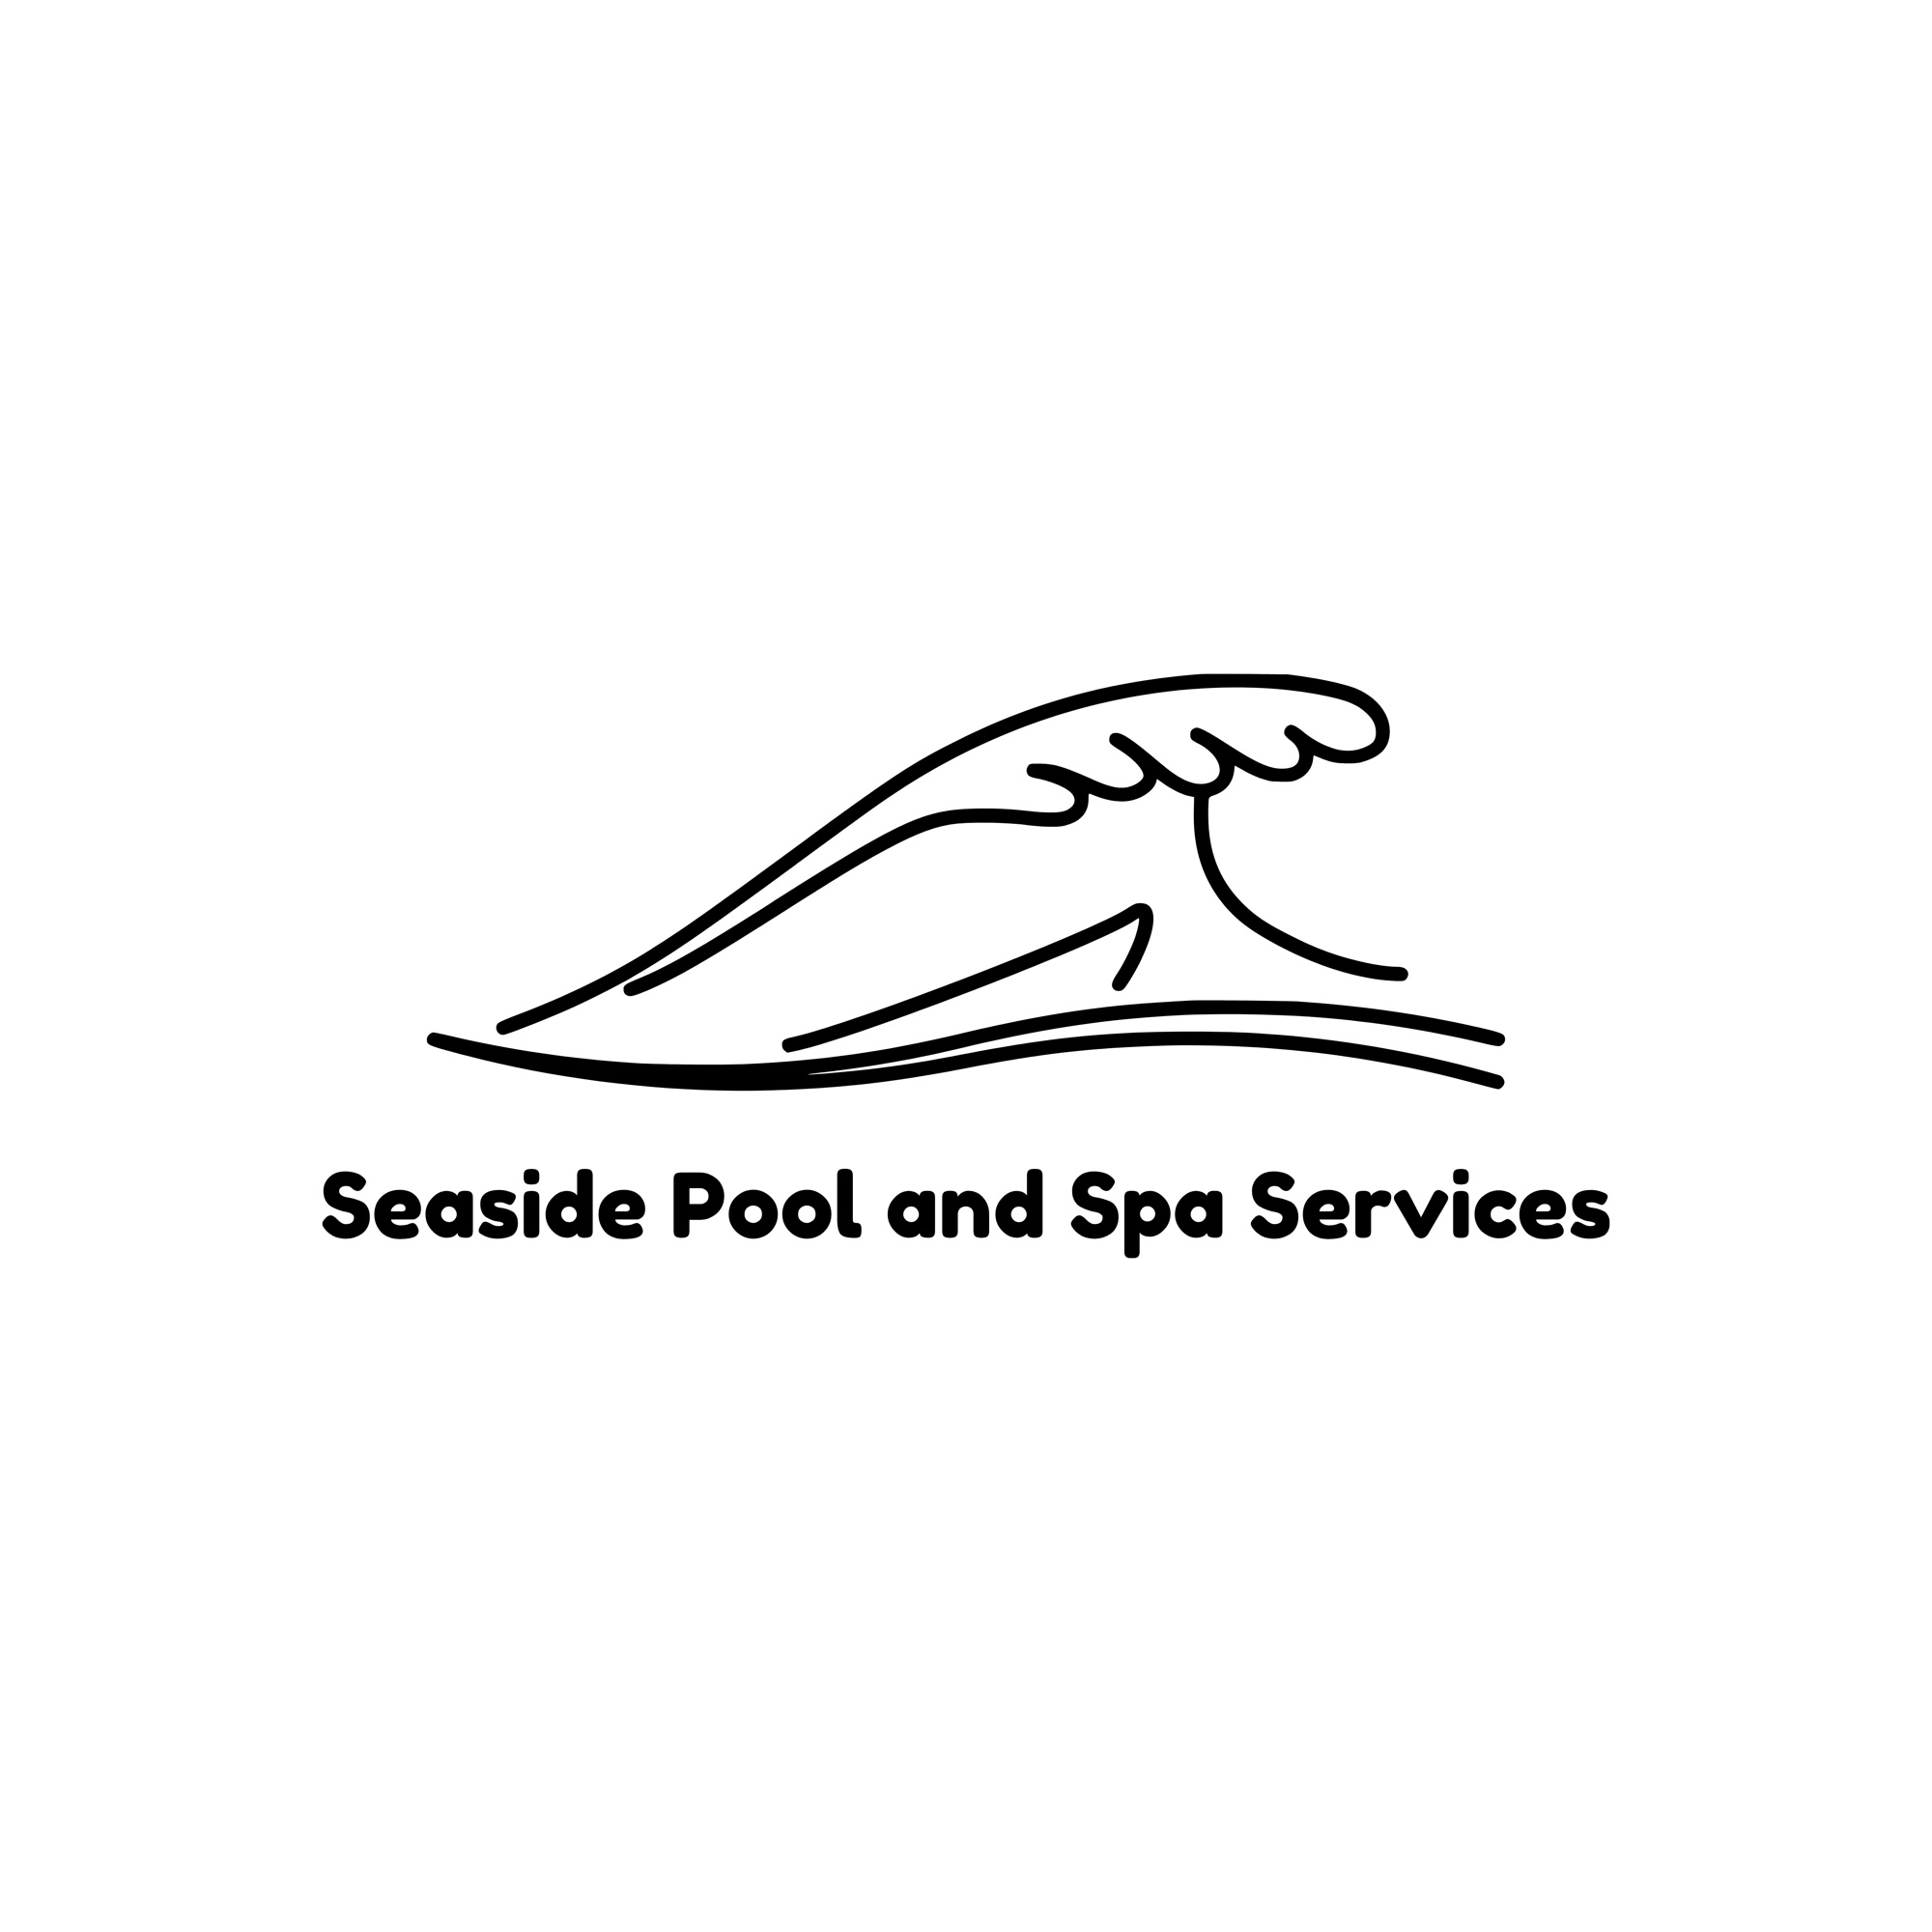 Seaside Pool and Spa Services Logo